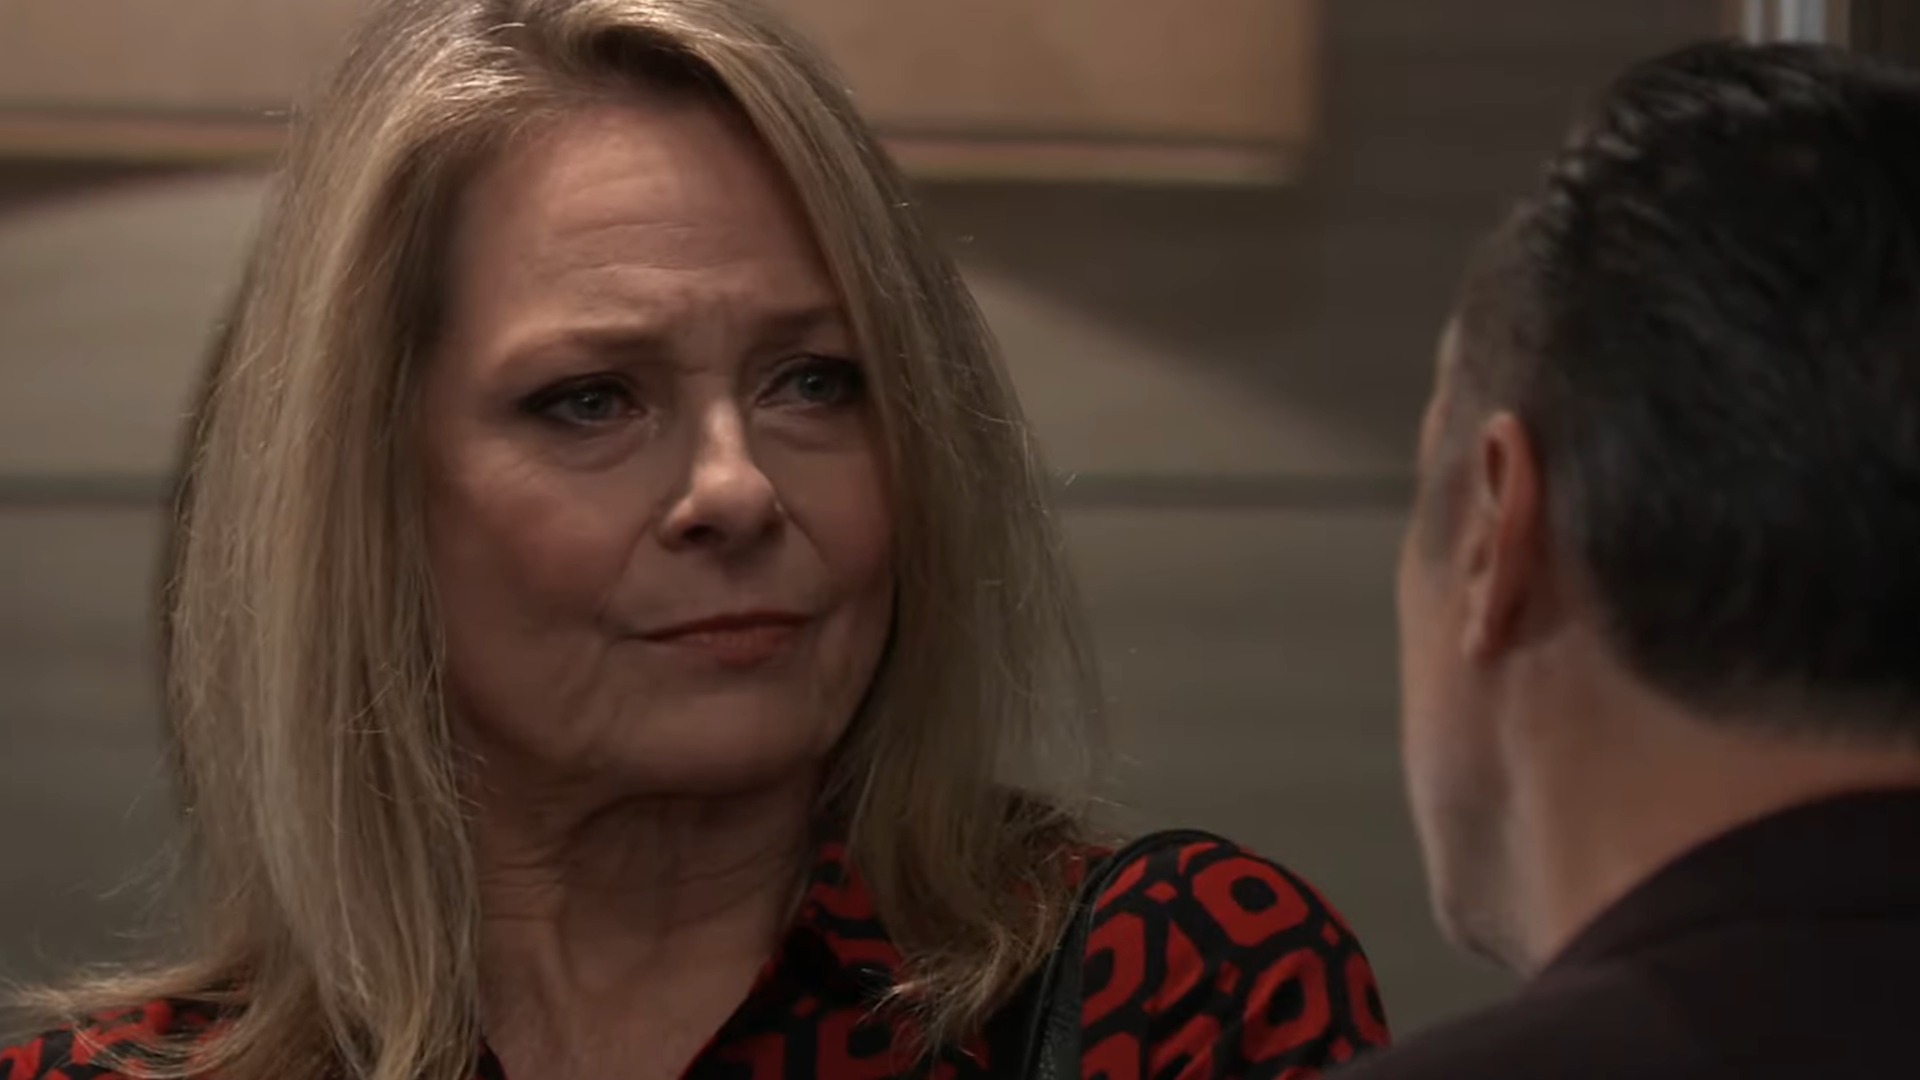 glady sonny talk wu GH Recaps SoapsSpoilers